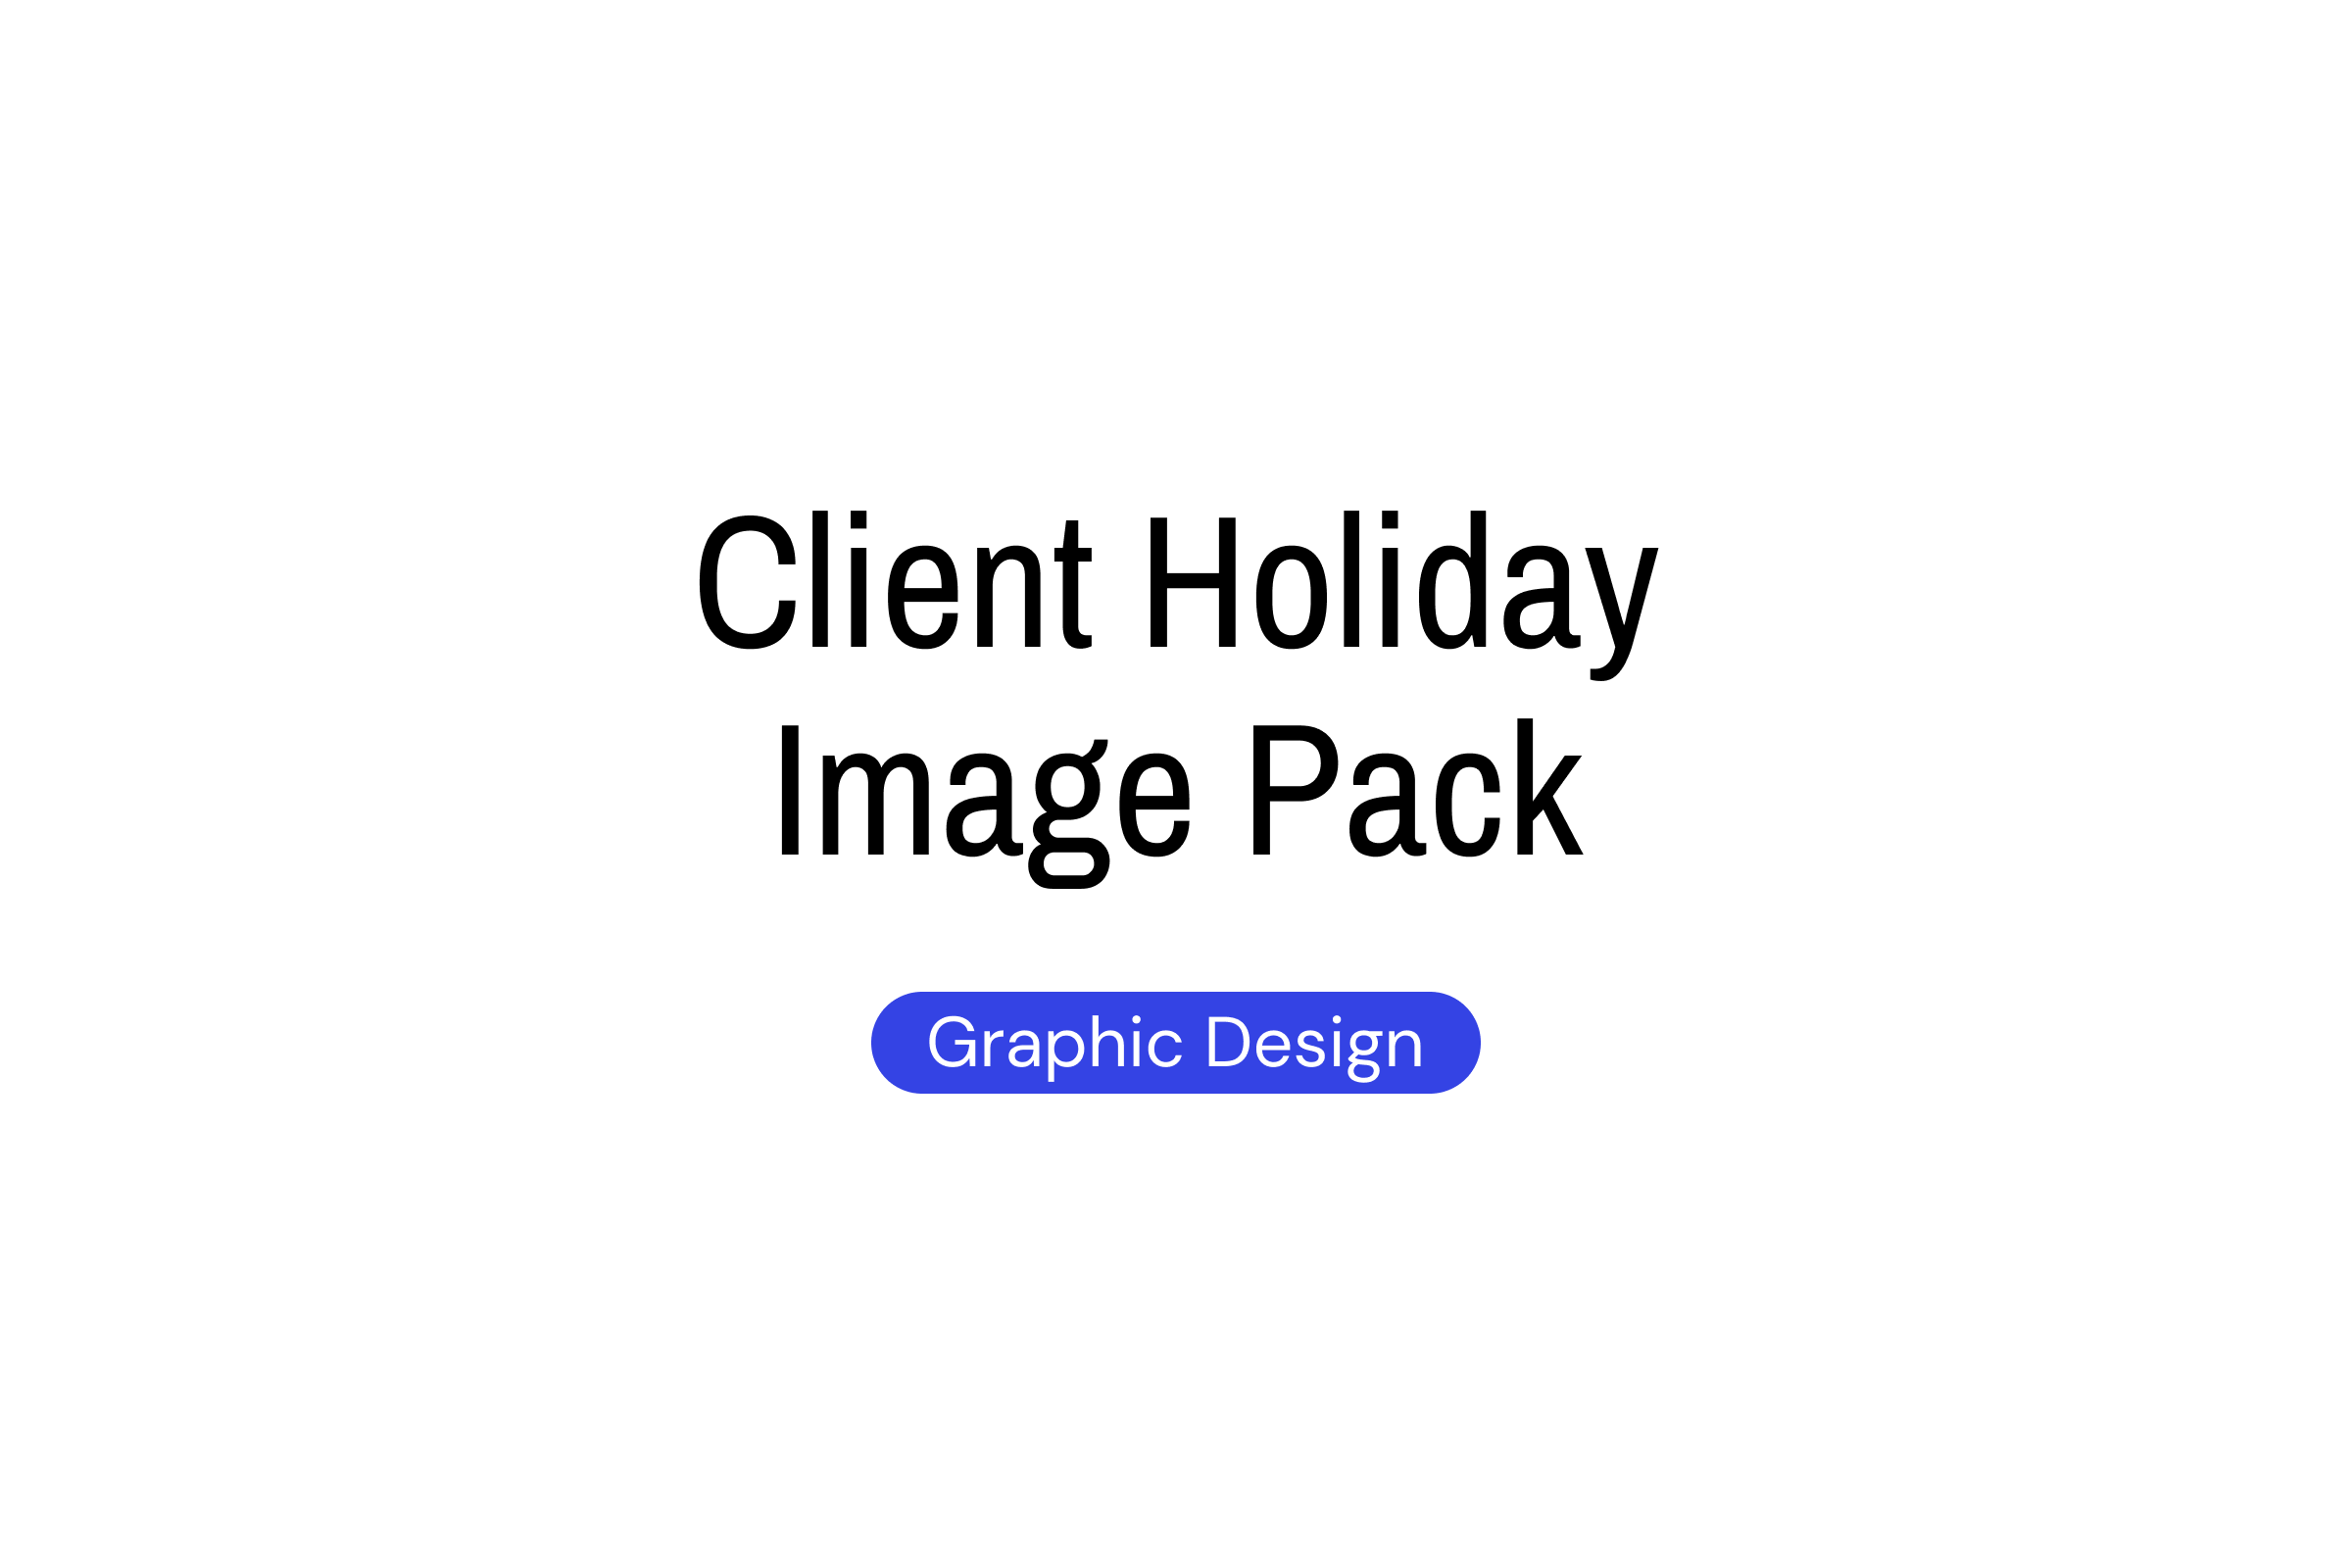 Client Holiday Image Pack | Skills: Graphic Design